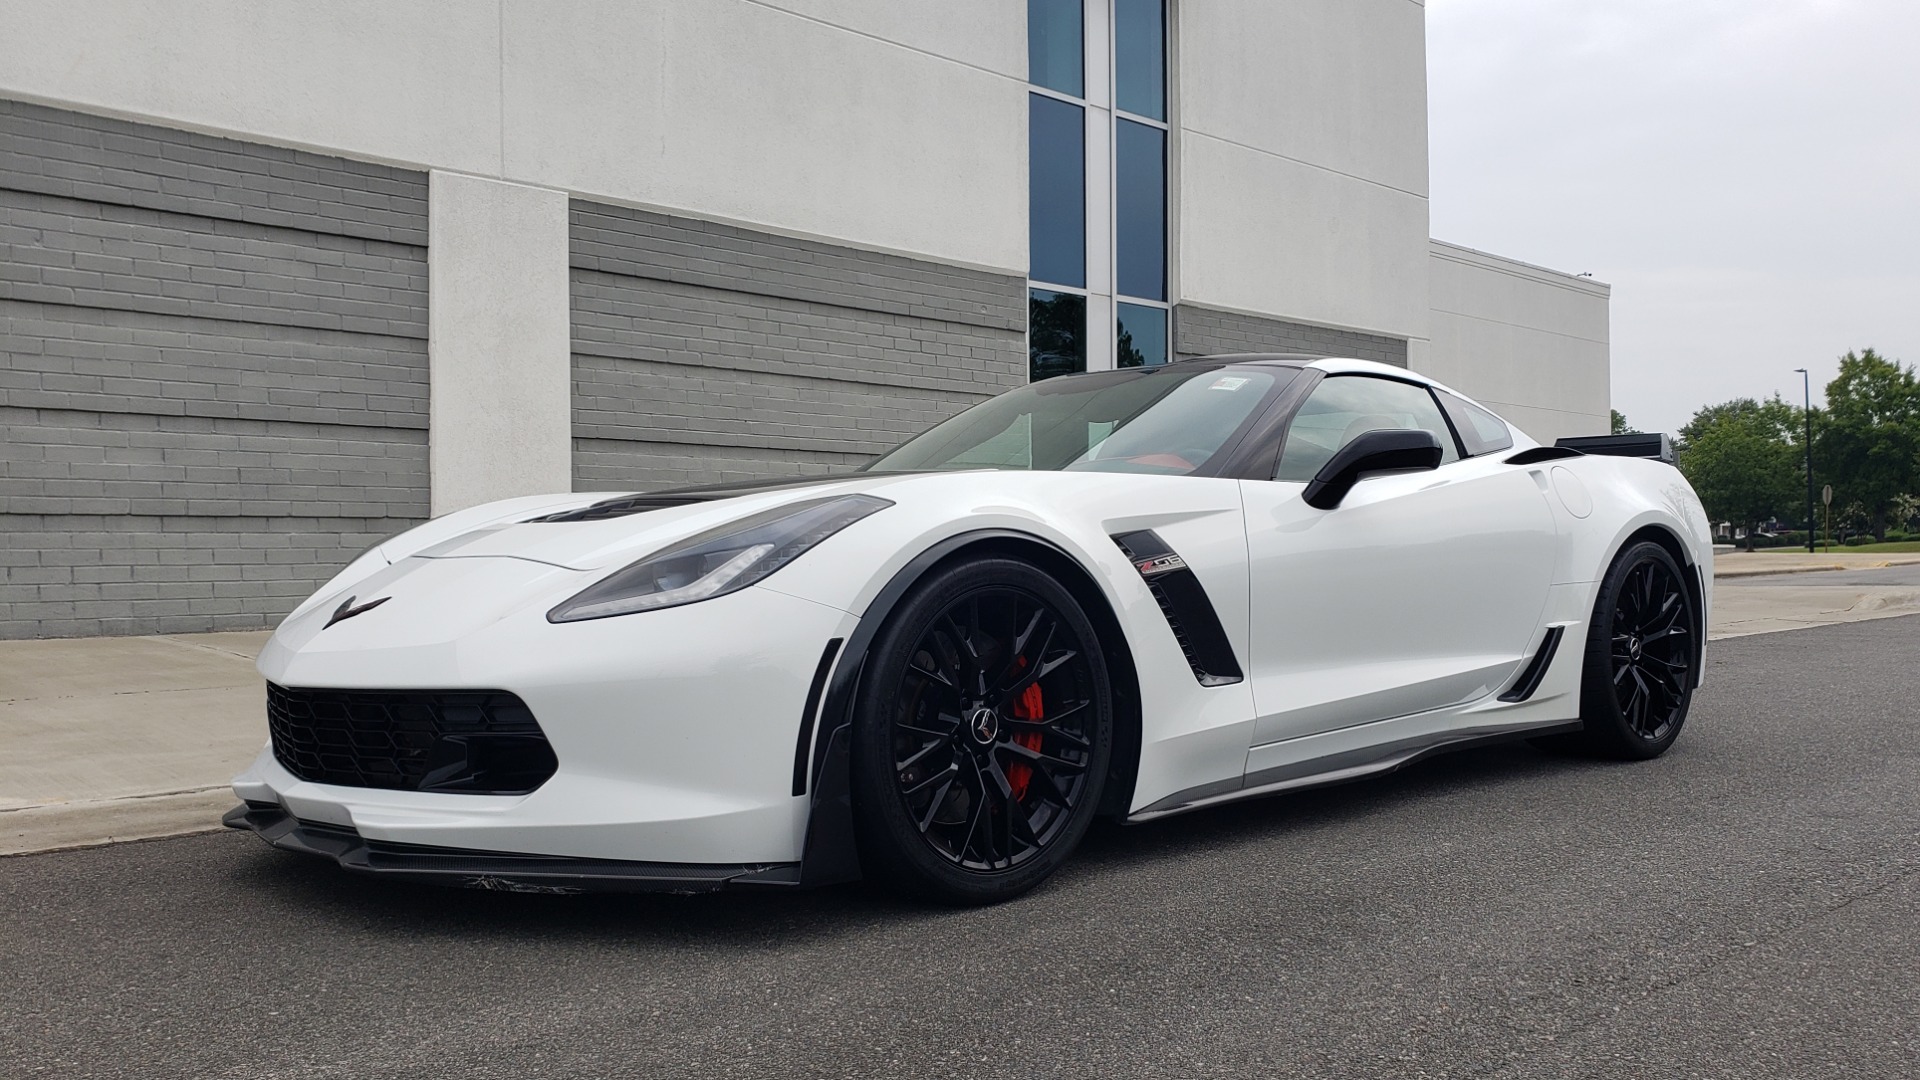 Used 2015 Chevrolet CORVETTE C7 Z06 3LZ COUPE / NAV / COMP STS / CF ROOF / REMOTE START / REARVIEW for sale Sold at Formula Imports in Charlotte NC 28227 3